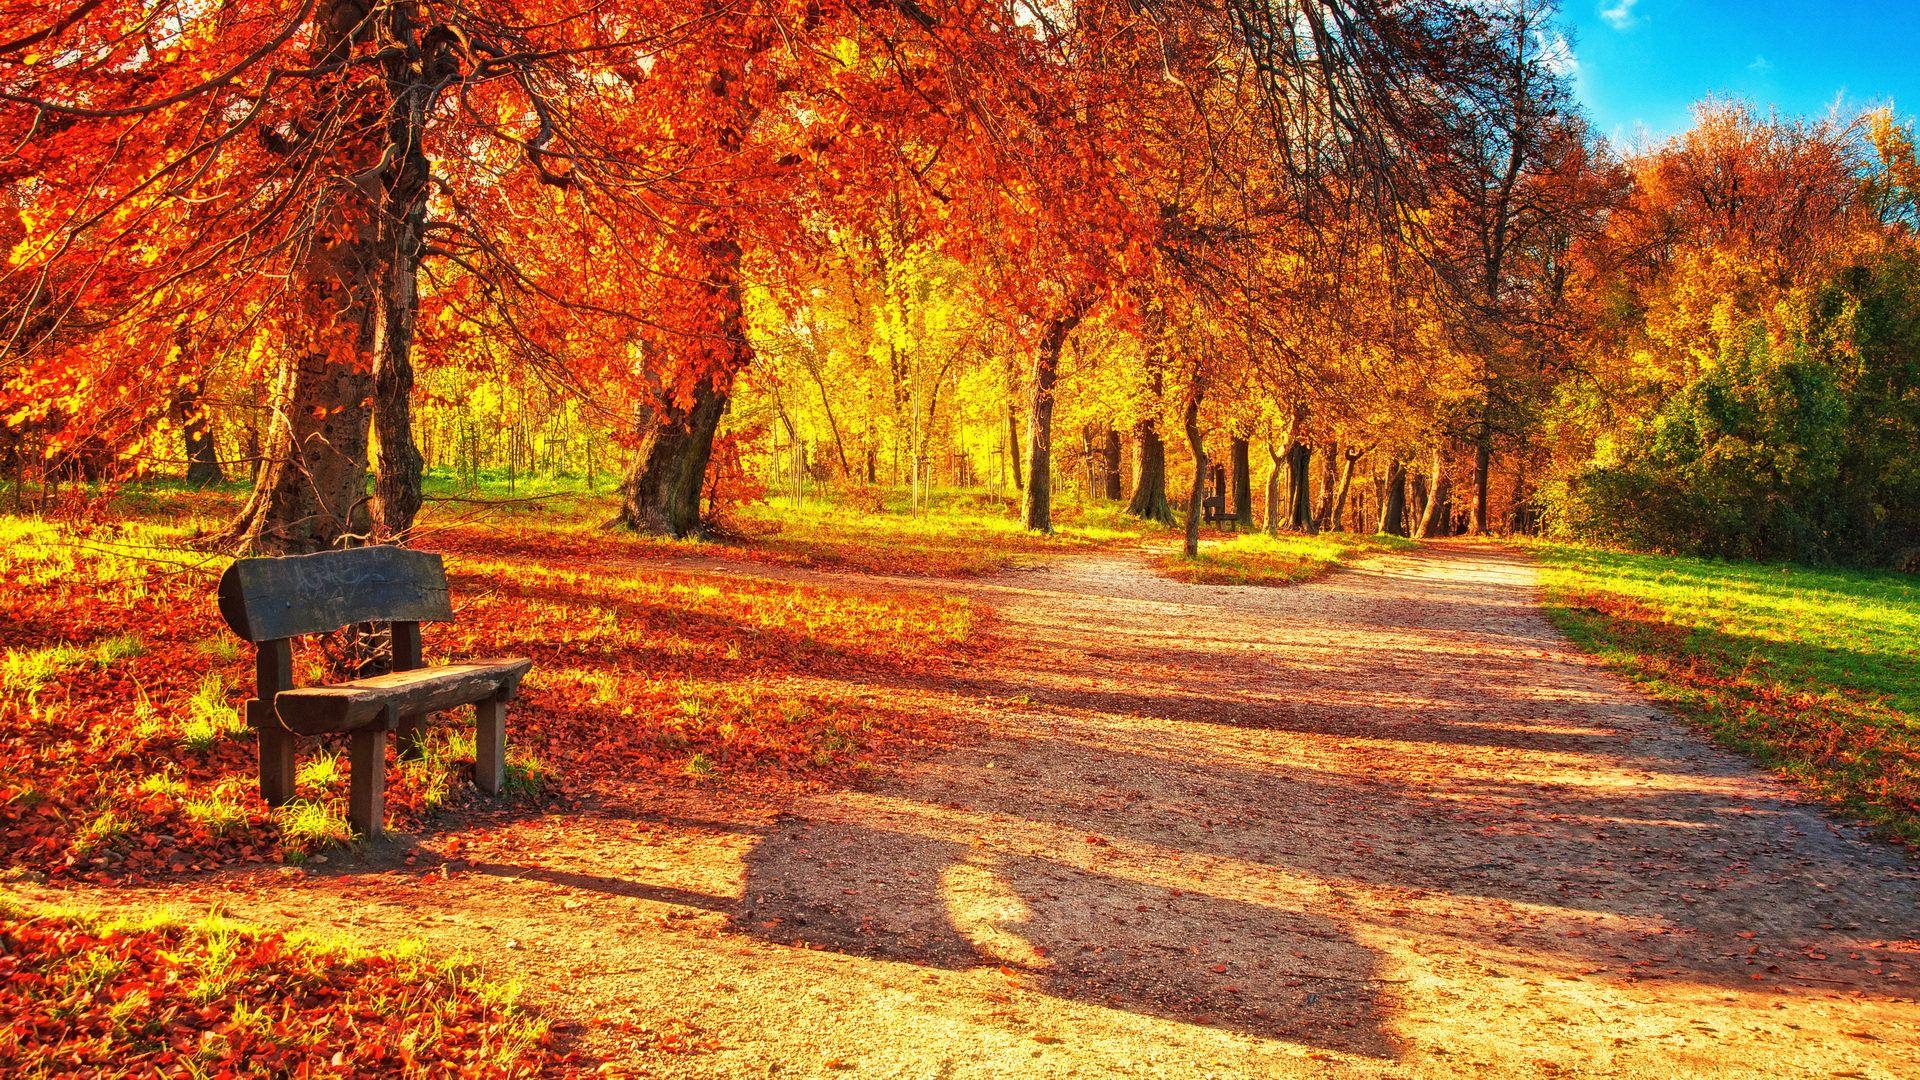 Fall Wallpaper, Background, Image, Picture. Design